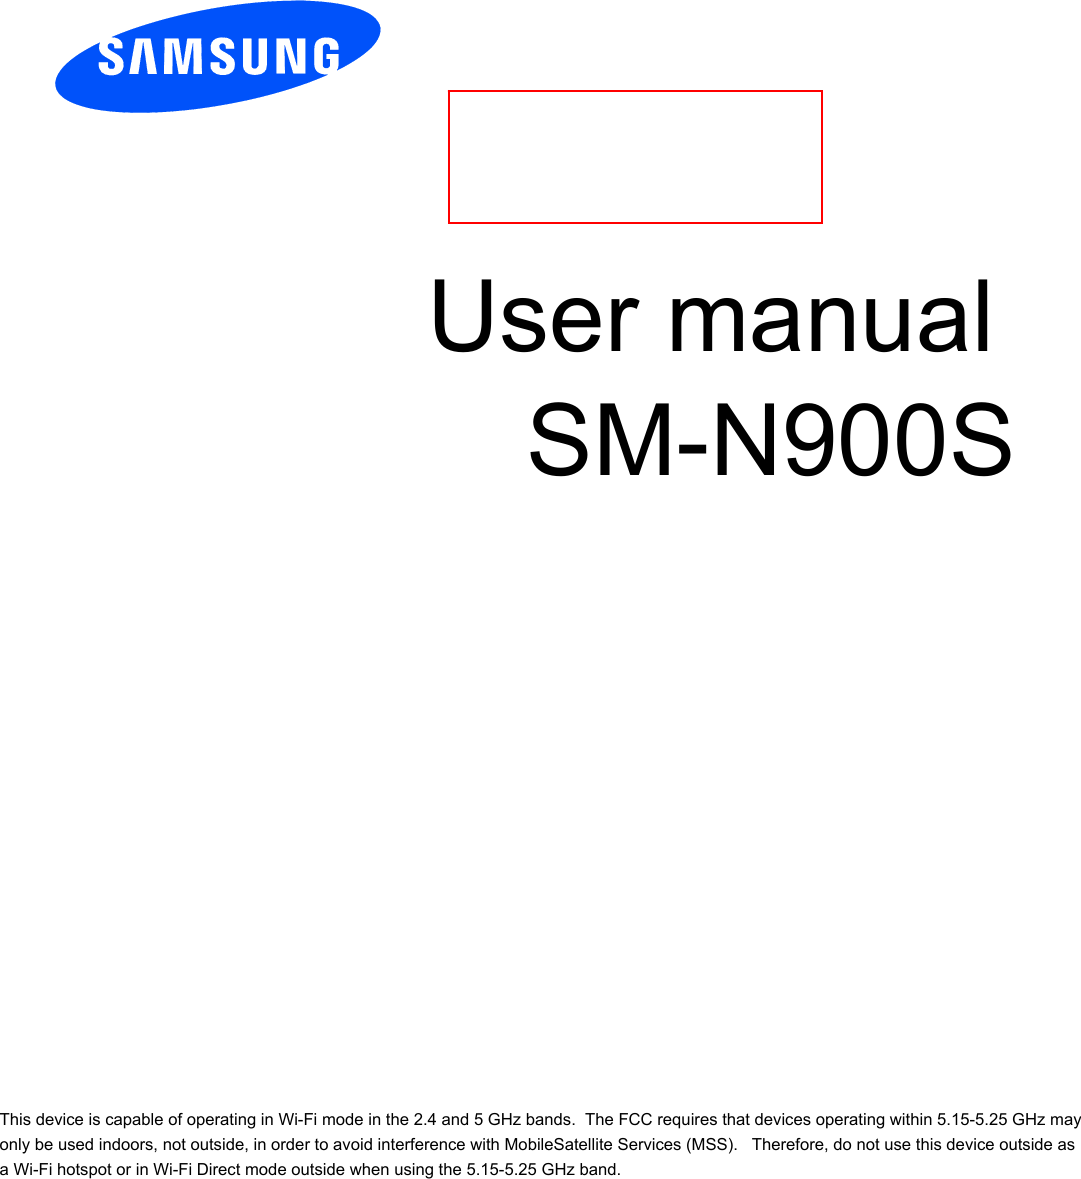          User manual                  SM-N900S                 This device is capable of operating in Wi-Fi mode in the 2.4 and 5 GHz bands.  The FCC requires that devices operating within 5.15-5.25 GHz may only be used indoors, not outside, in order to avoid interference with MobileSatellite Services (MSS).   Therefore, do not use this device outside as a Wi-Fi hotspot or in Wi-Fi Direct mode outside when using the 5.15-5.25 GHz band. 